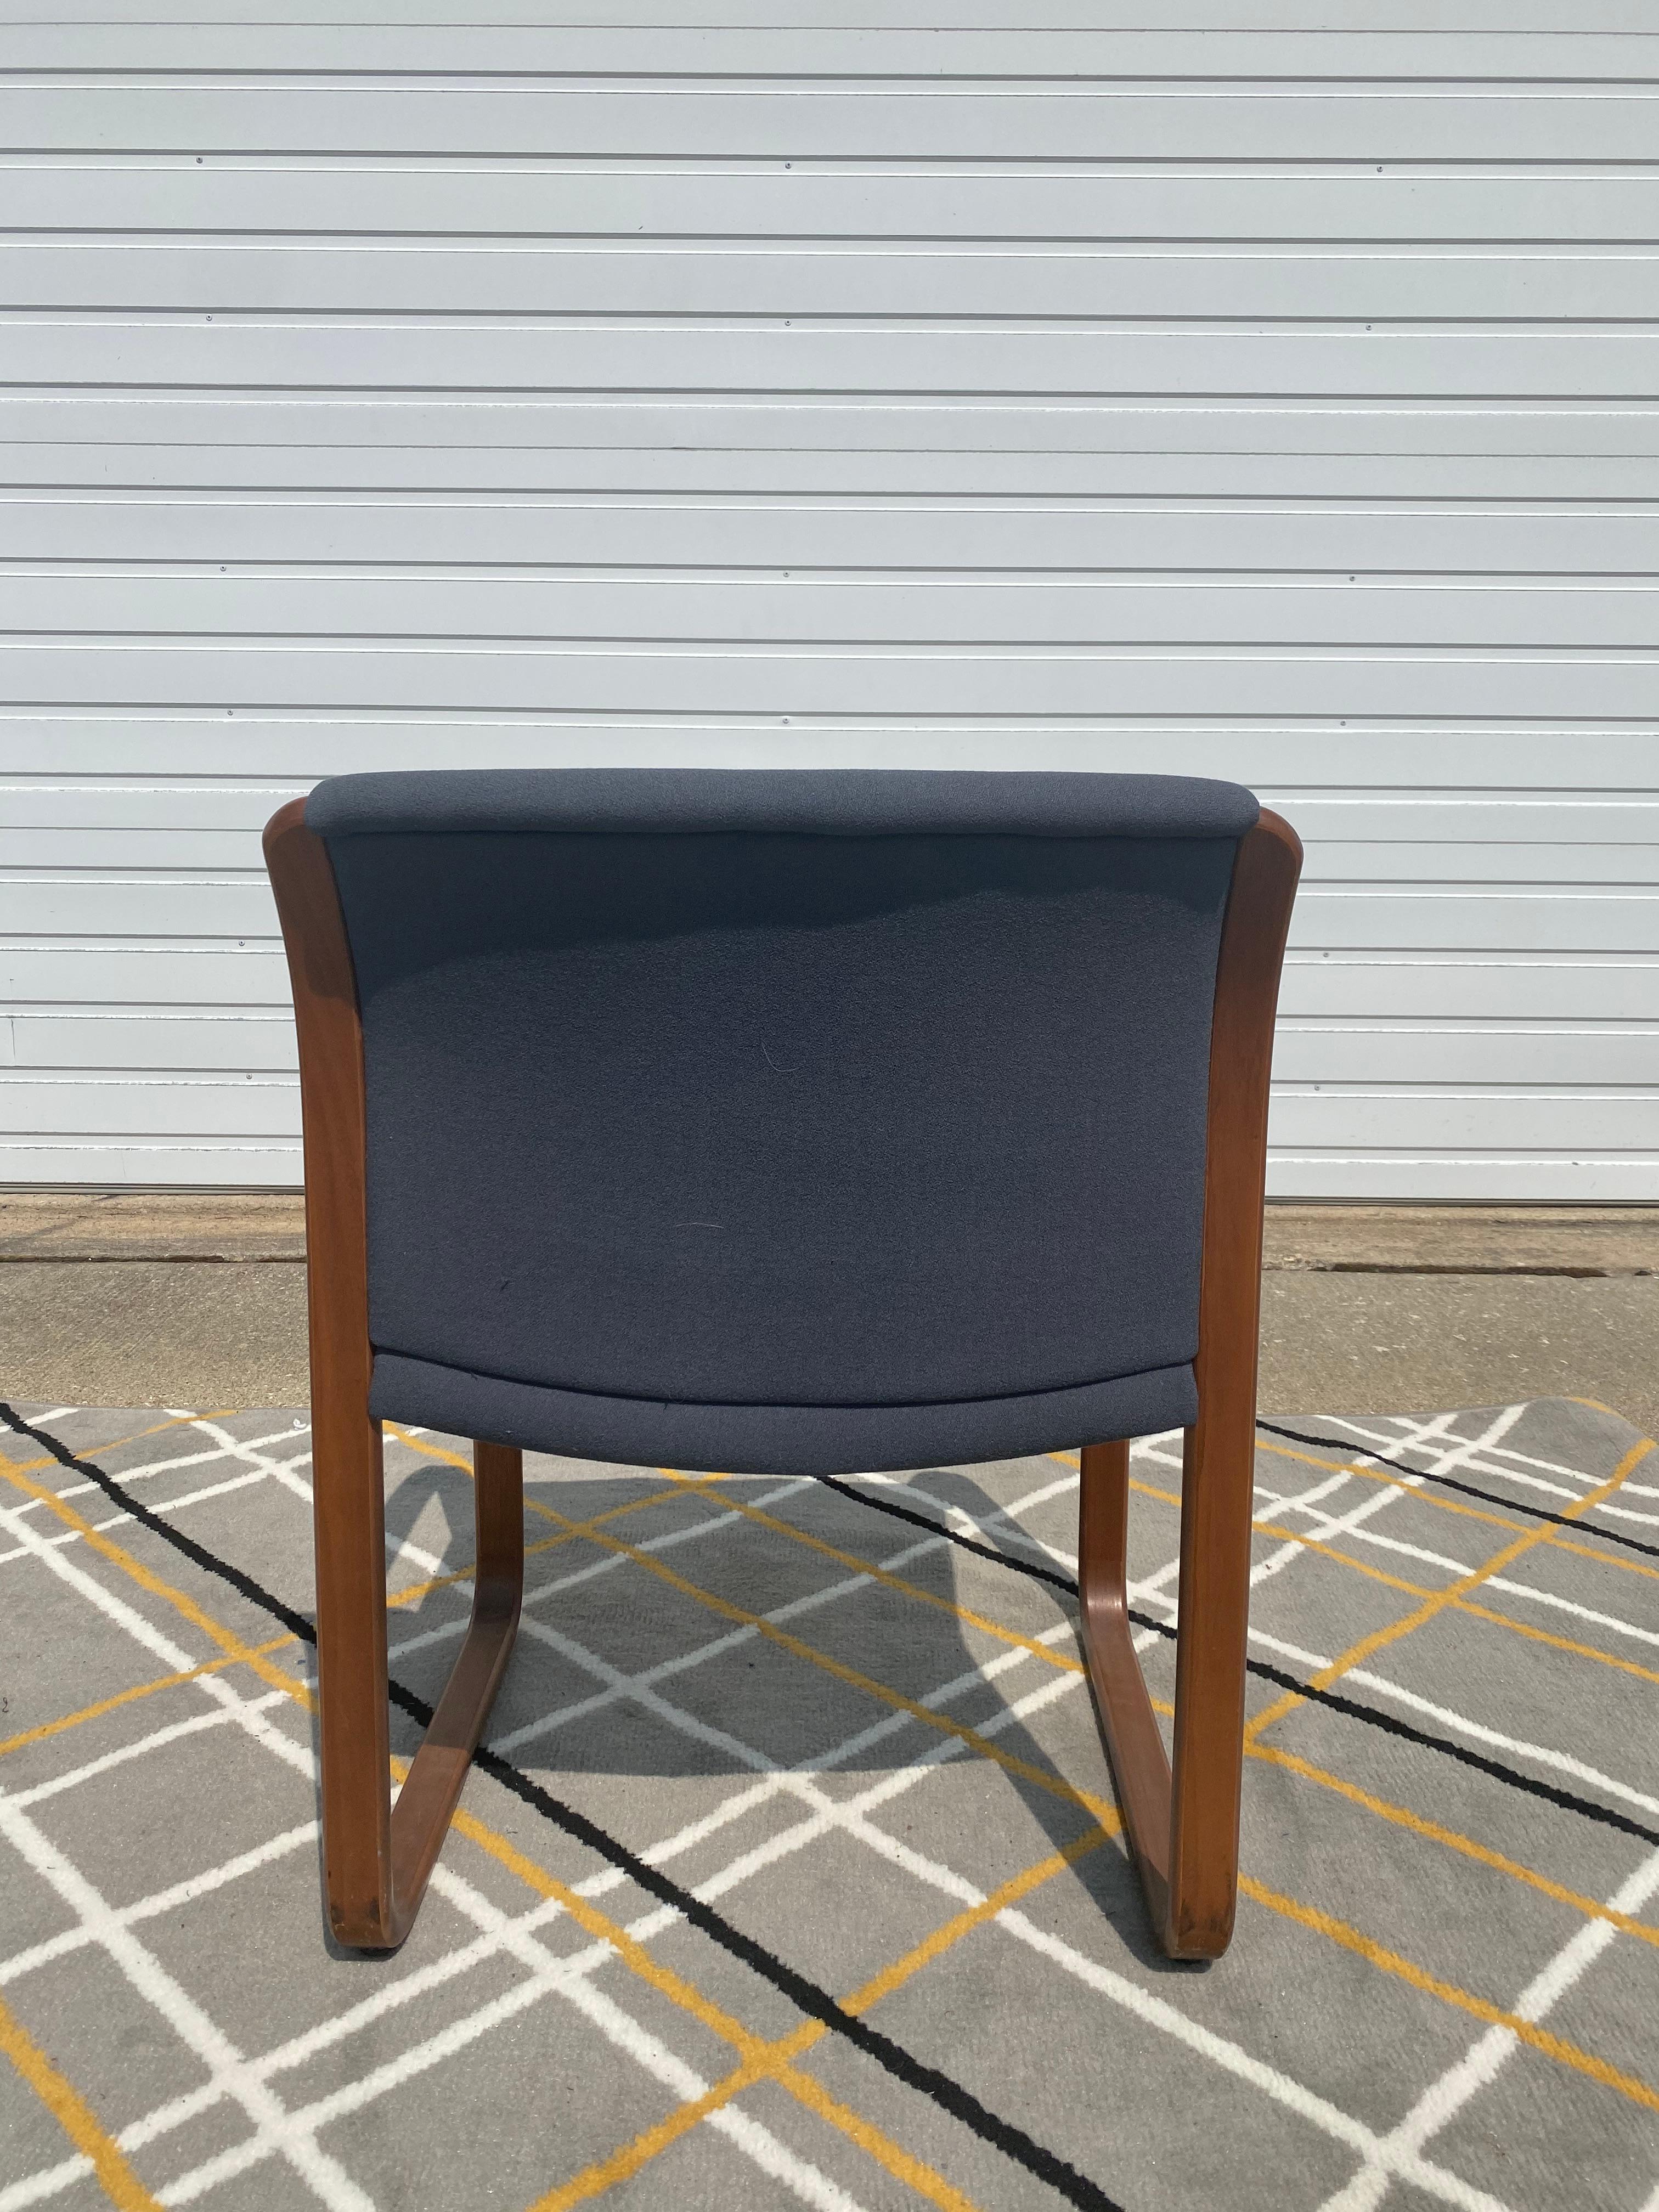 Original Steelcase Office Armchair In Good Condition For Sale In Medina, OH